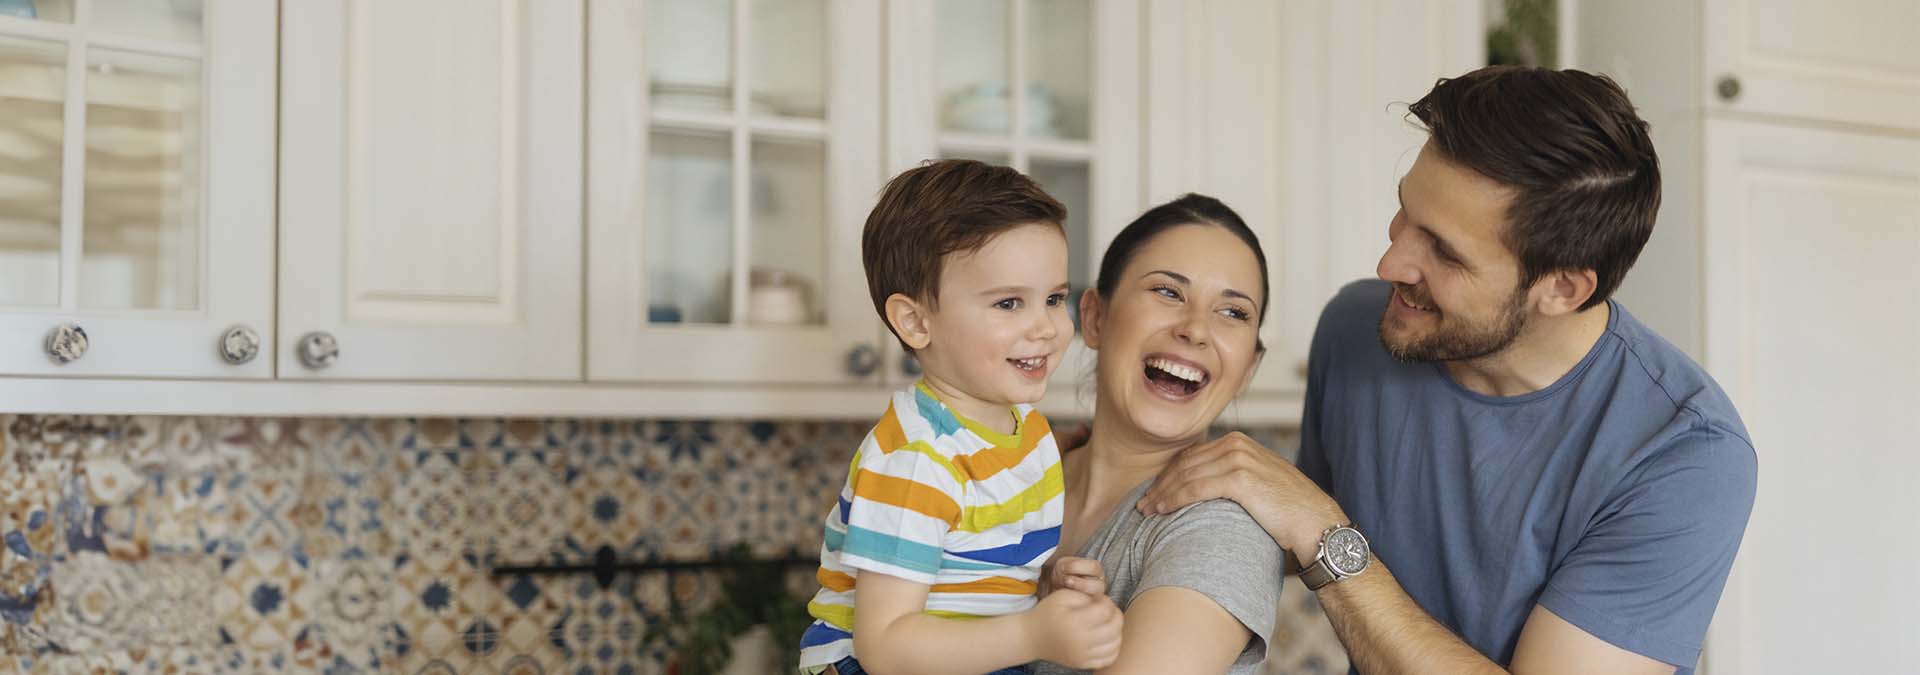 young couple and child smiling in kitchen